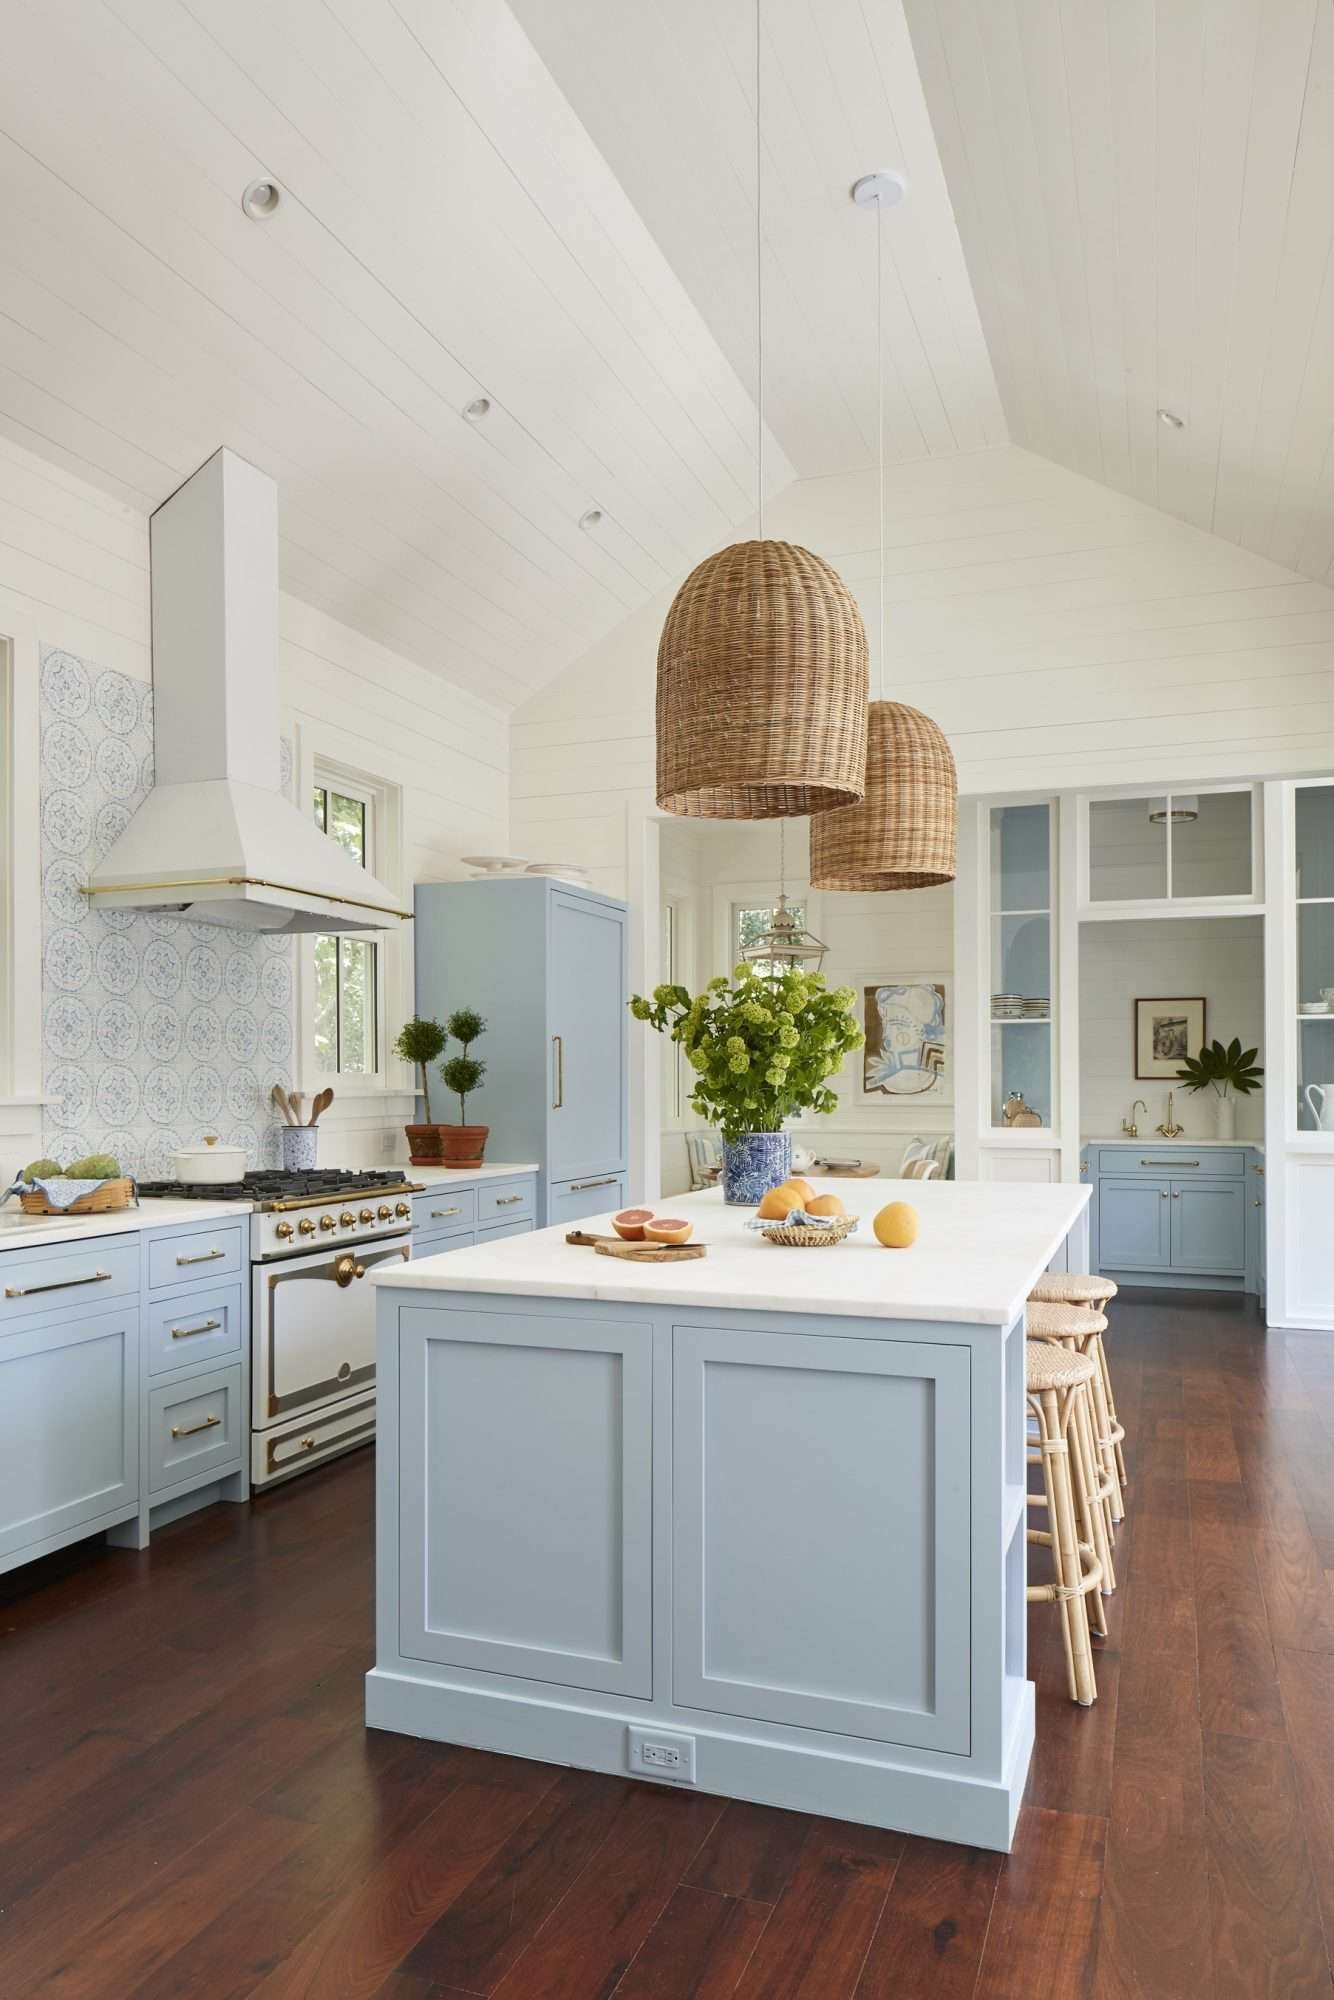 90 Beautiful Kitchen Ideas To Help You Plan Your Dream Space